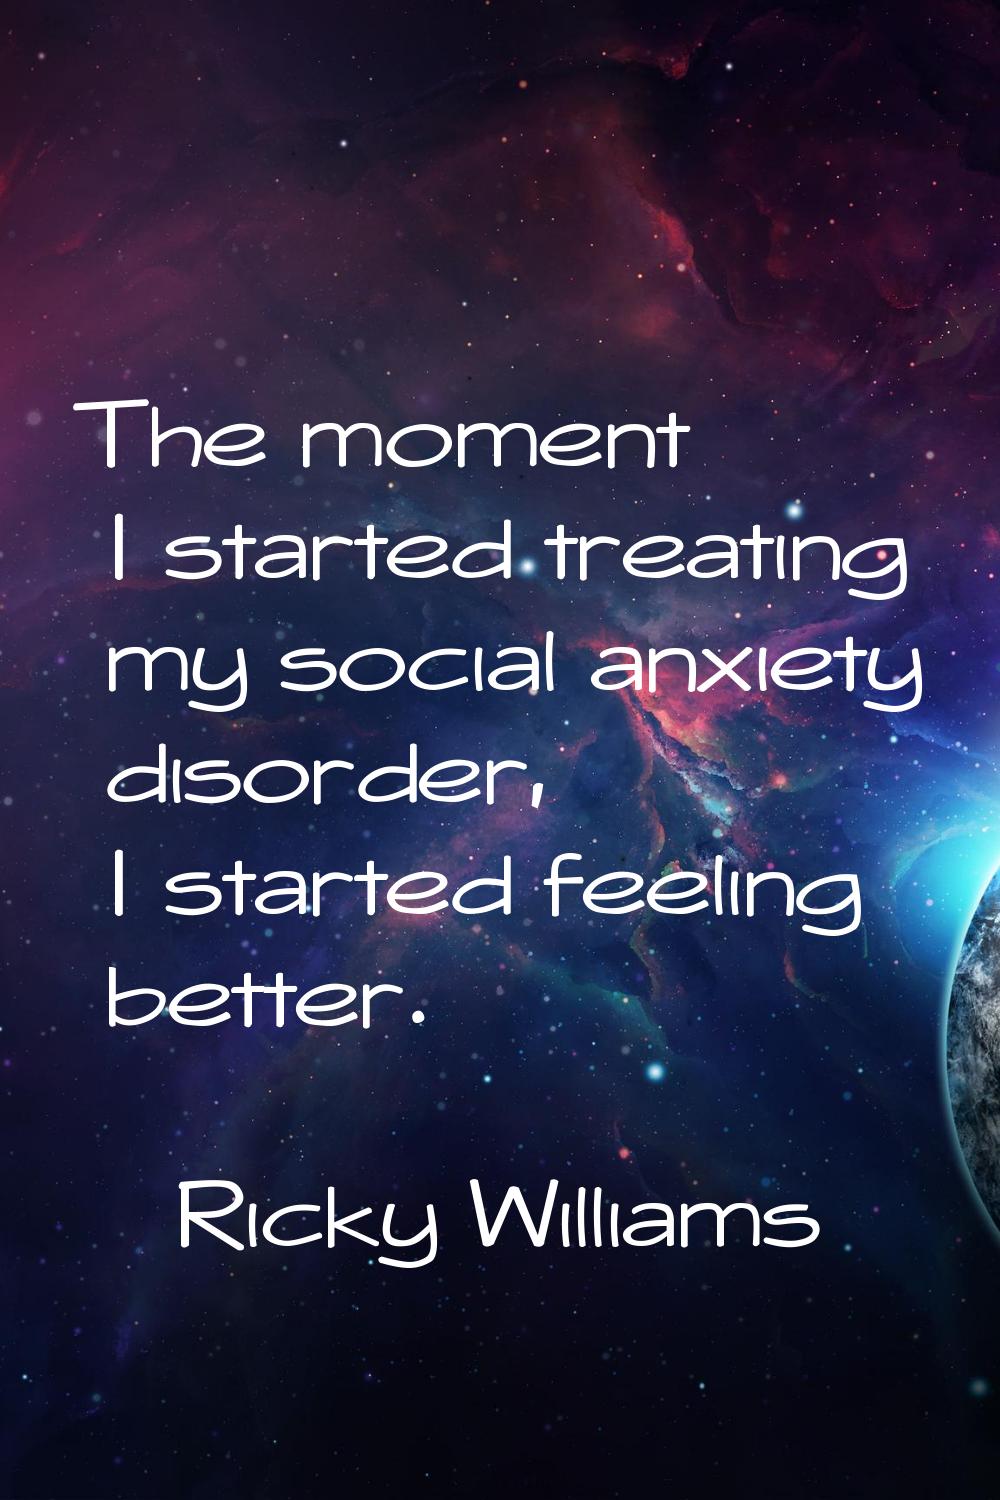 The moment I started treating my social anxiety disorder, I started feeling better.